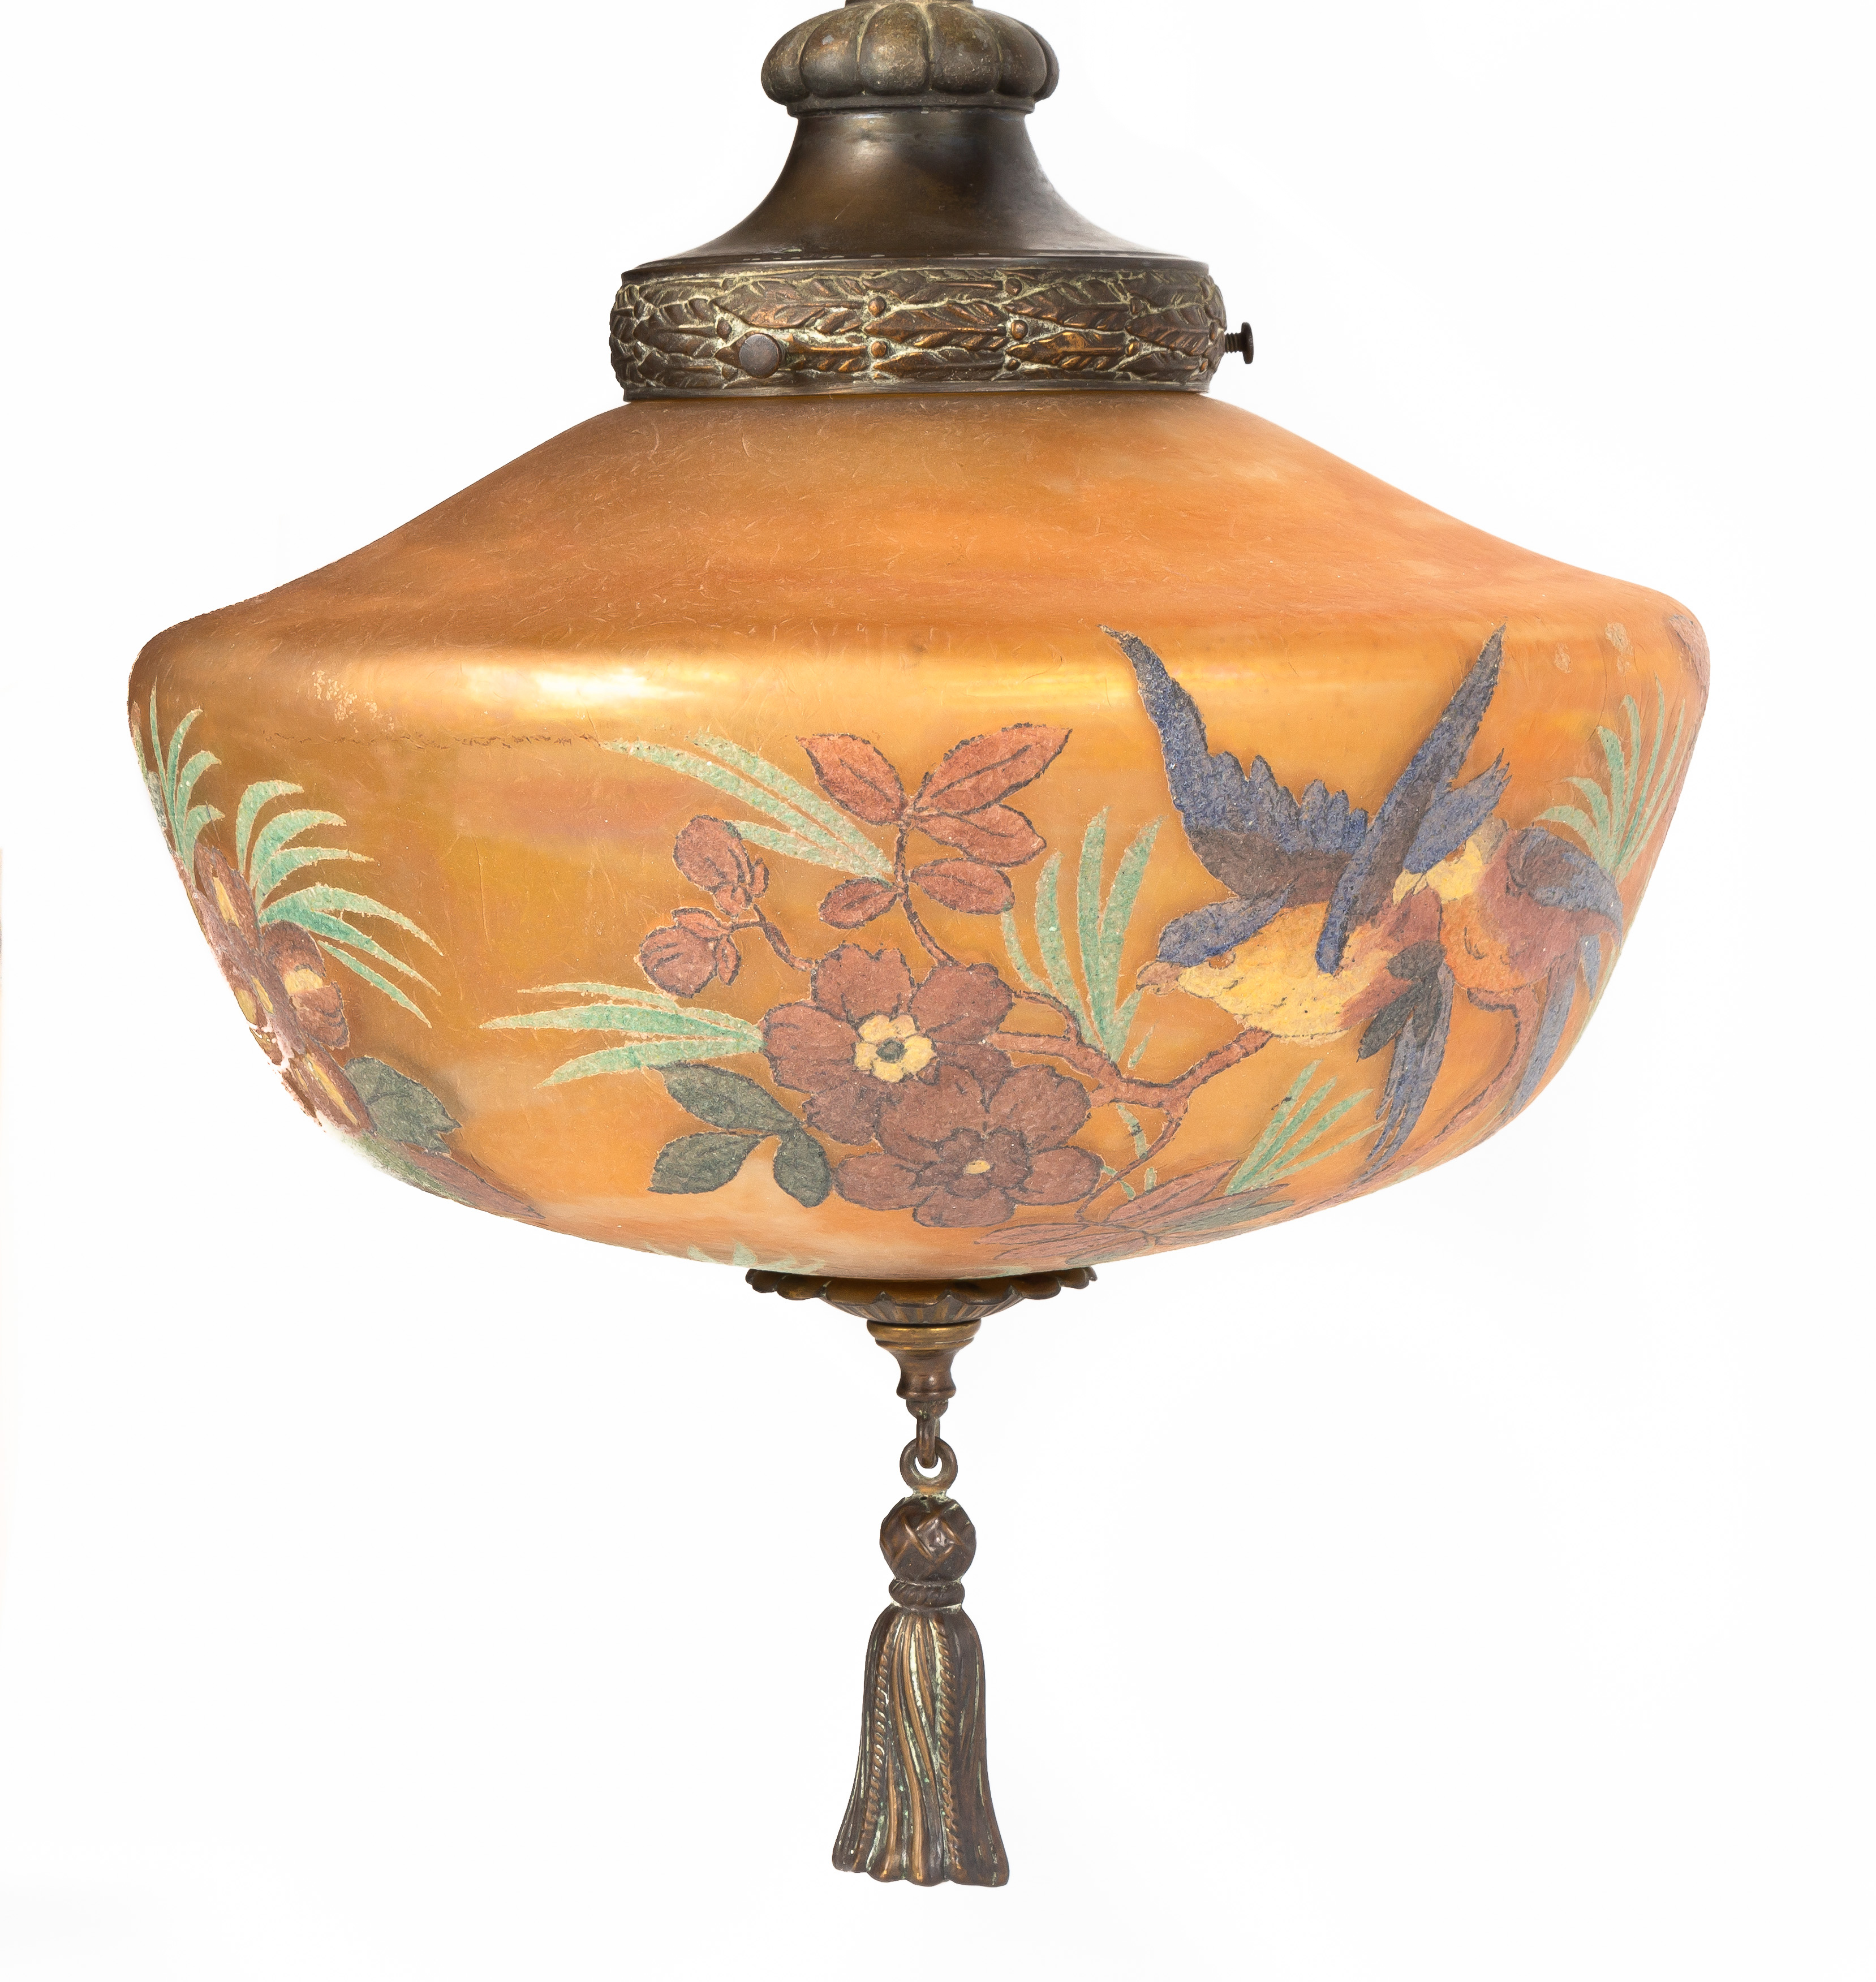 ATTRIBUTED TO HANDEL HANGING LAMP